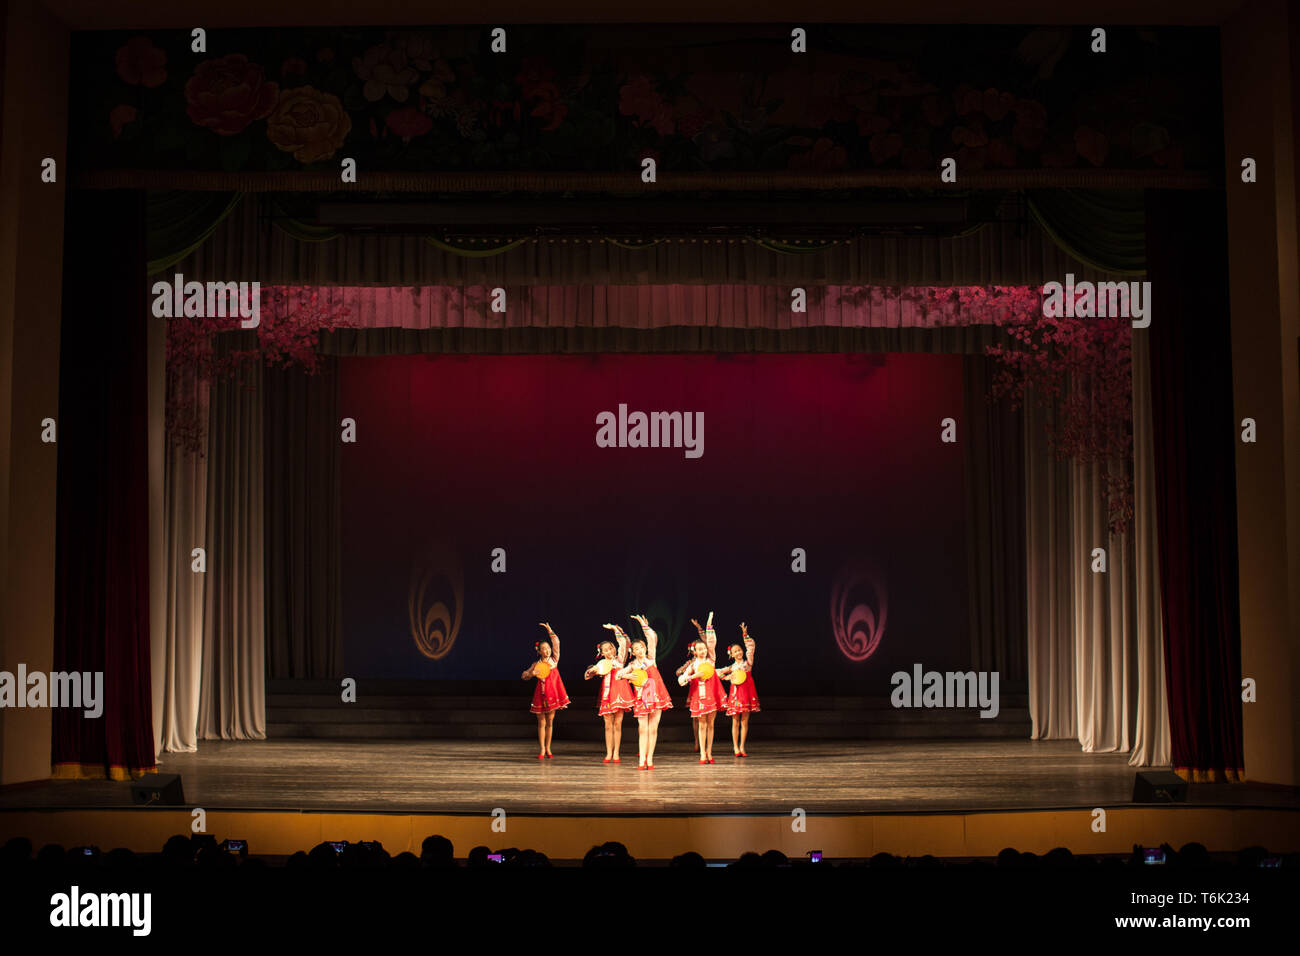 North Korean children perform a dance for visitors in a Pyongyang theatre. Stock Photo